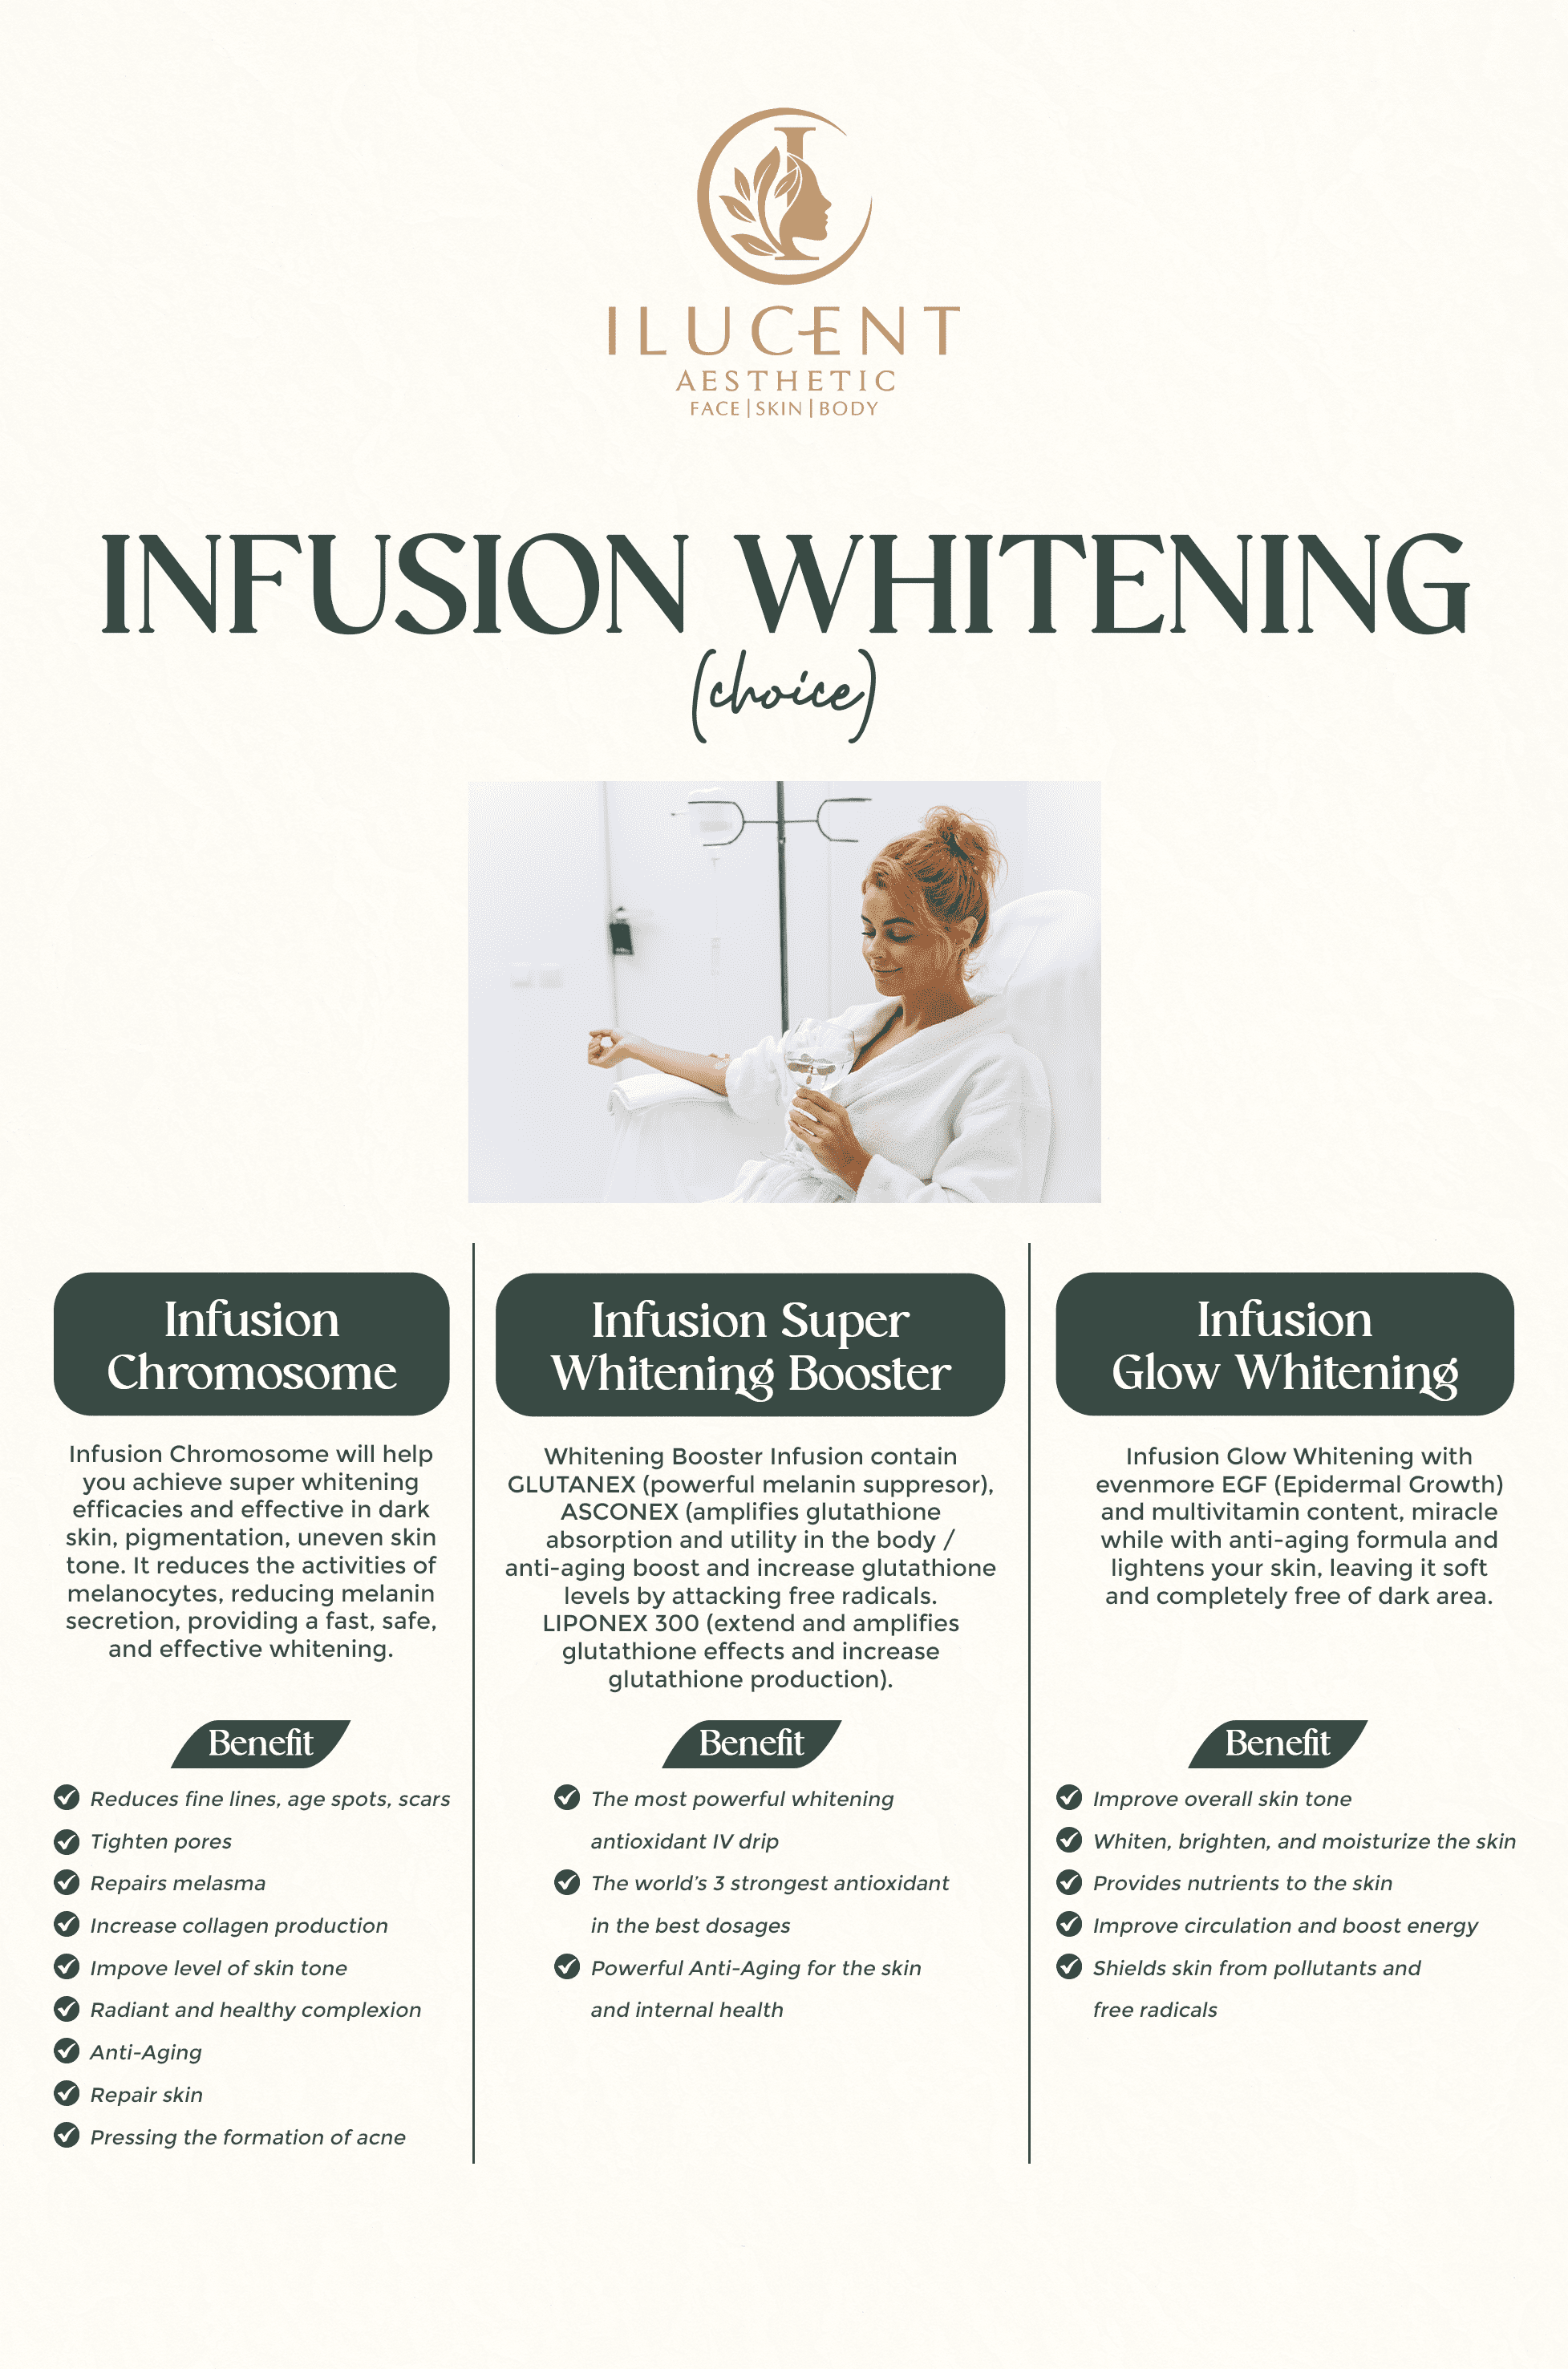 Infusion Whitening (Choice)